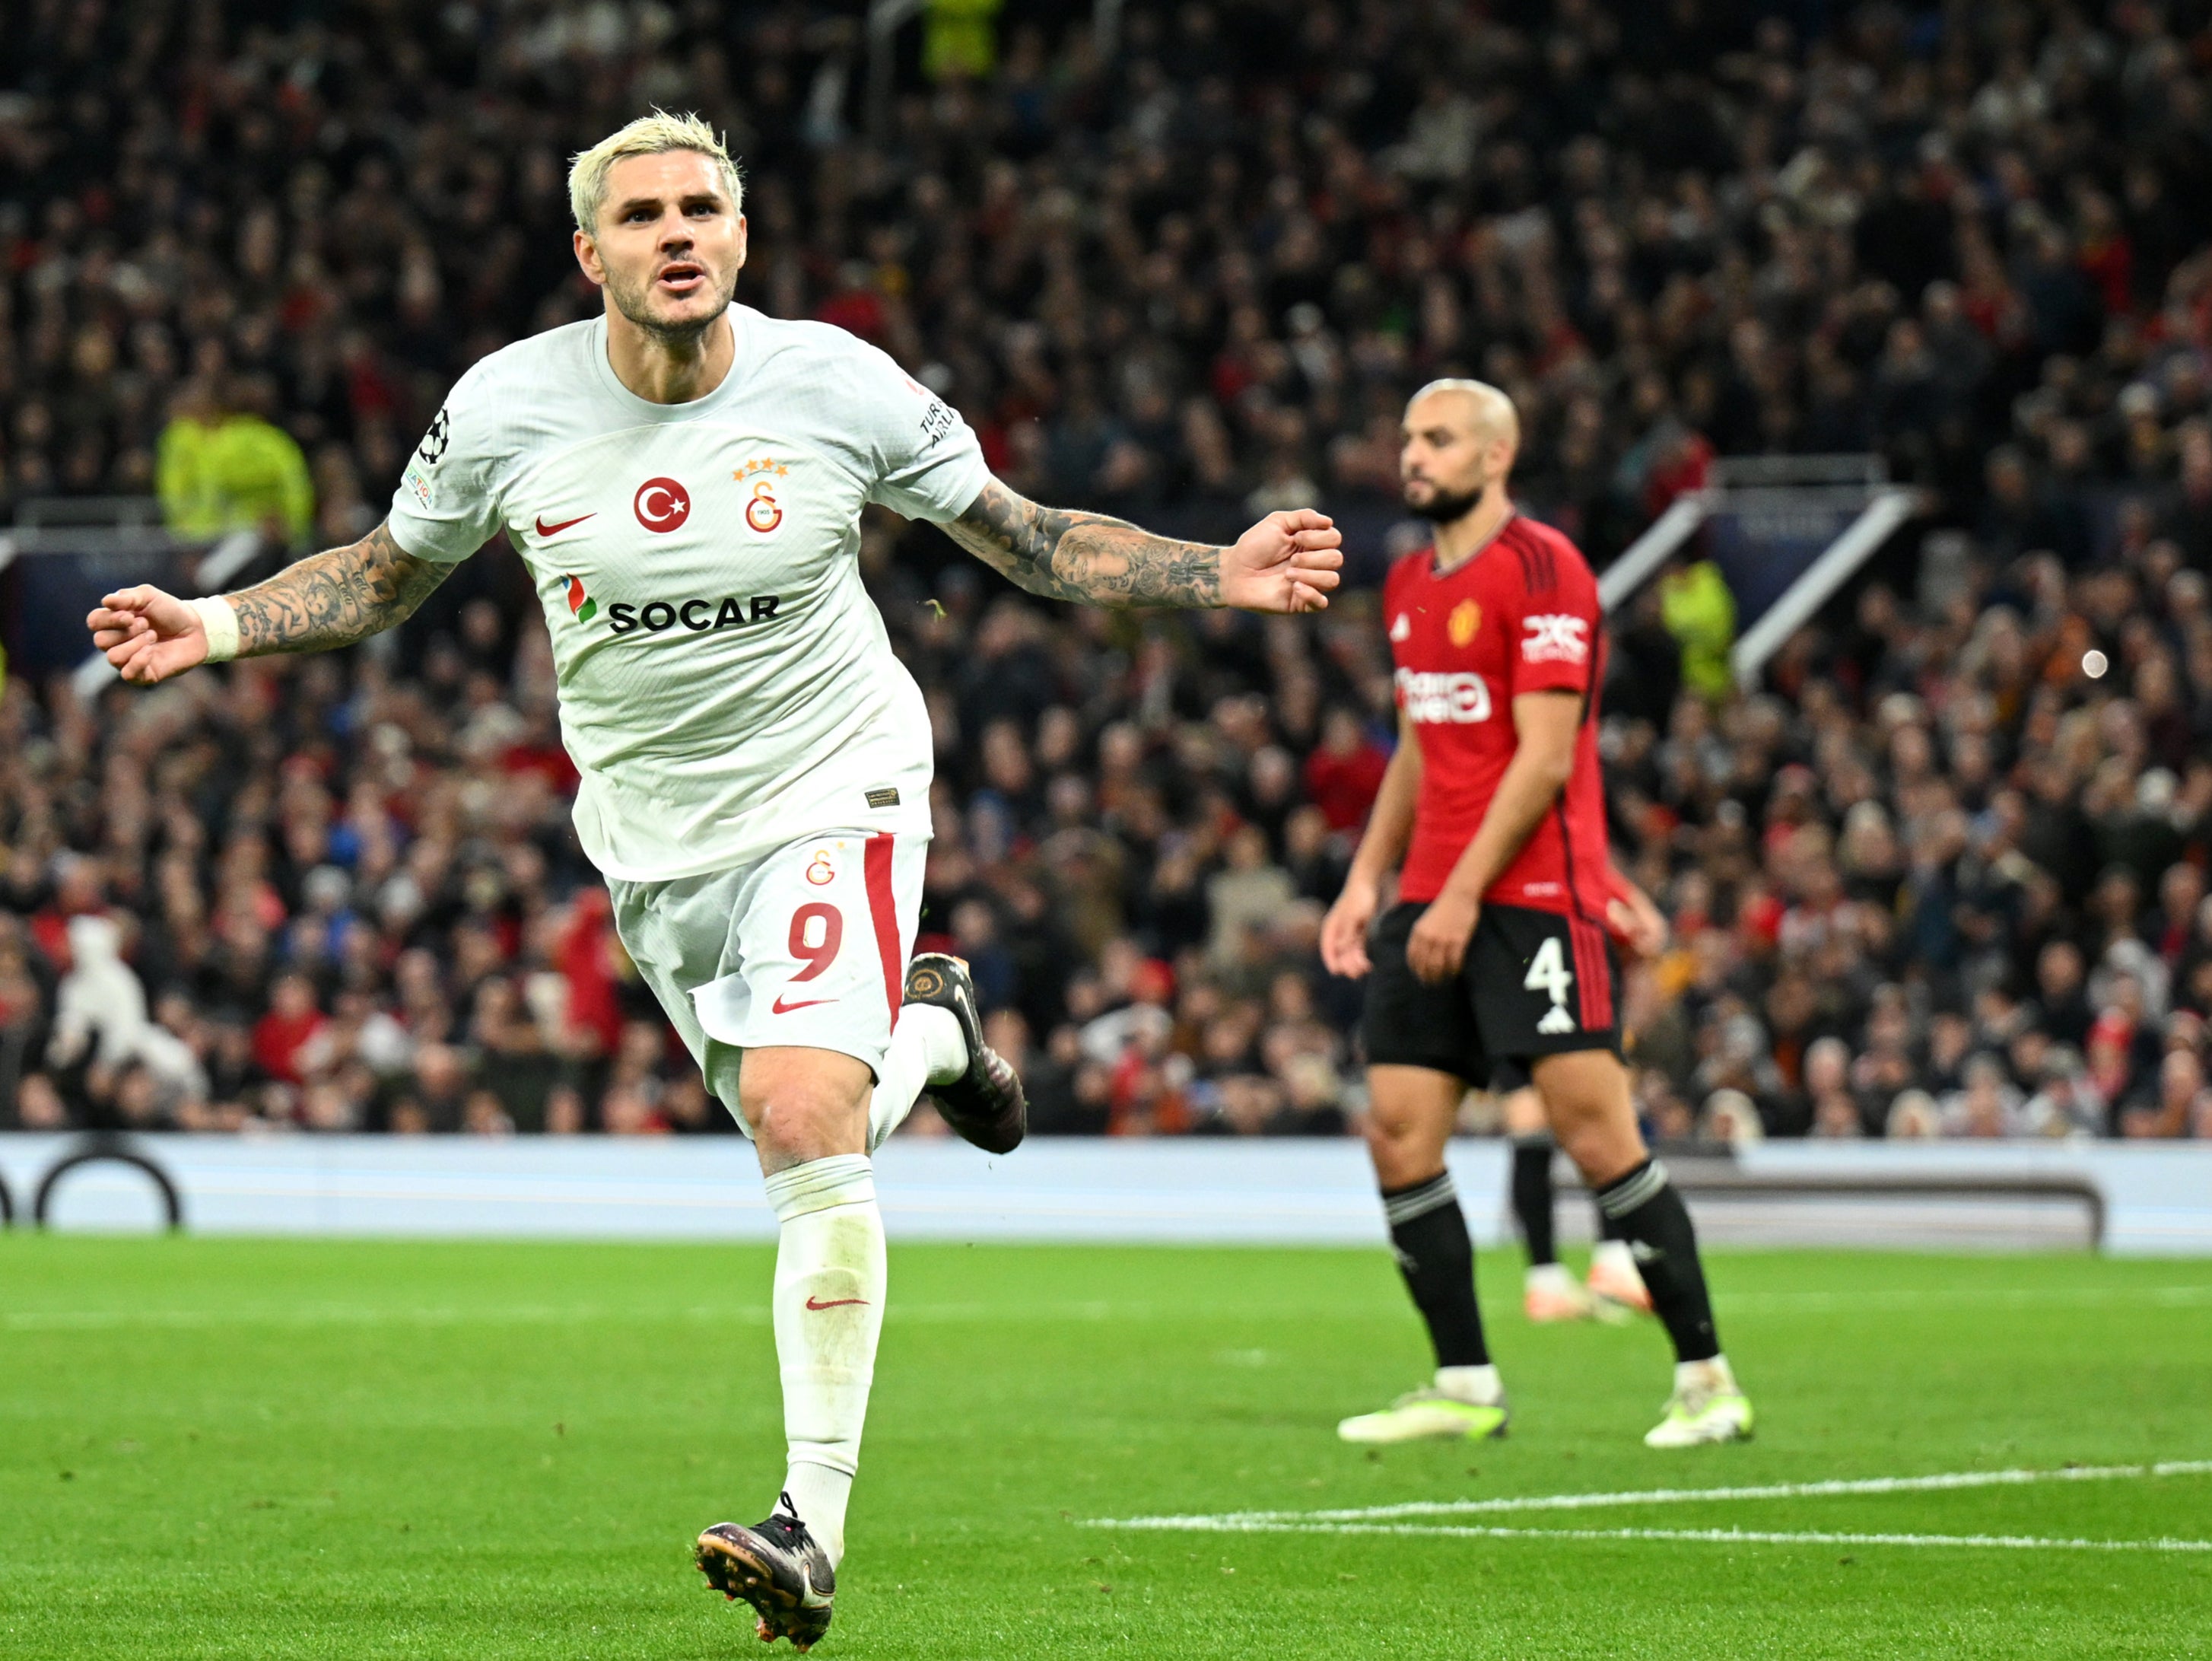 Galatasaray's Mauro Icardi, top, heads the ball with Manchester